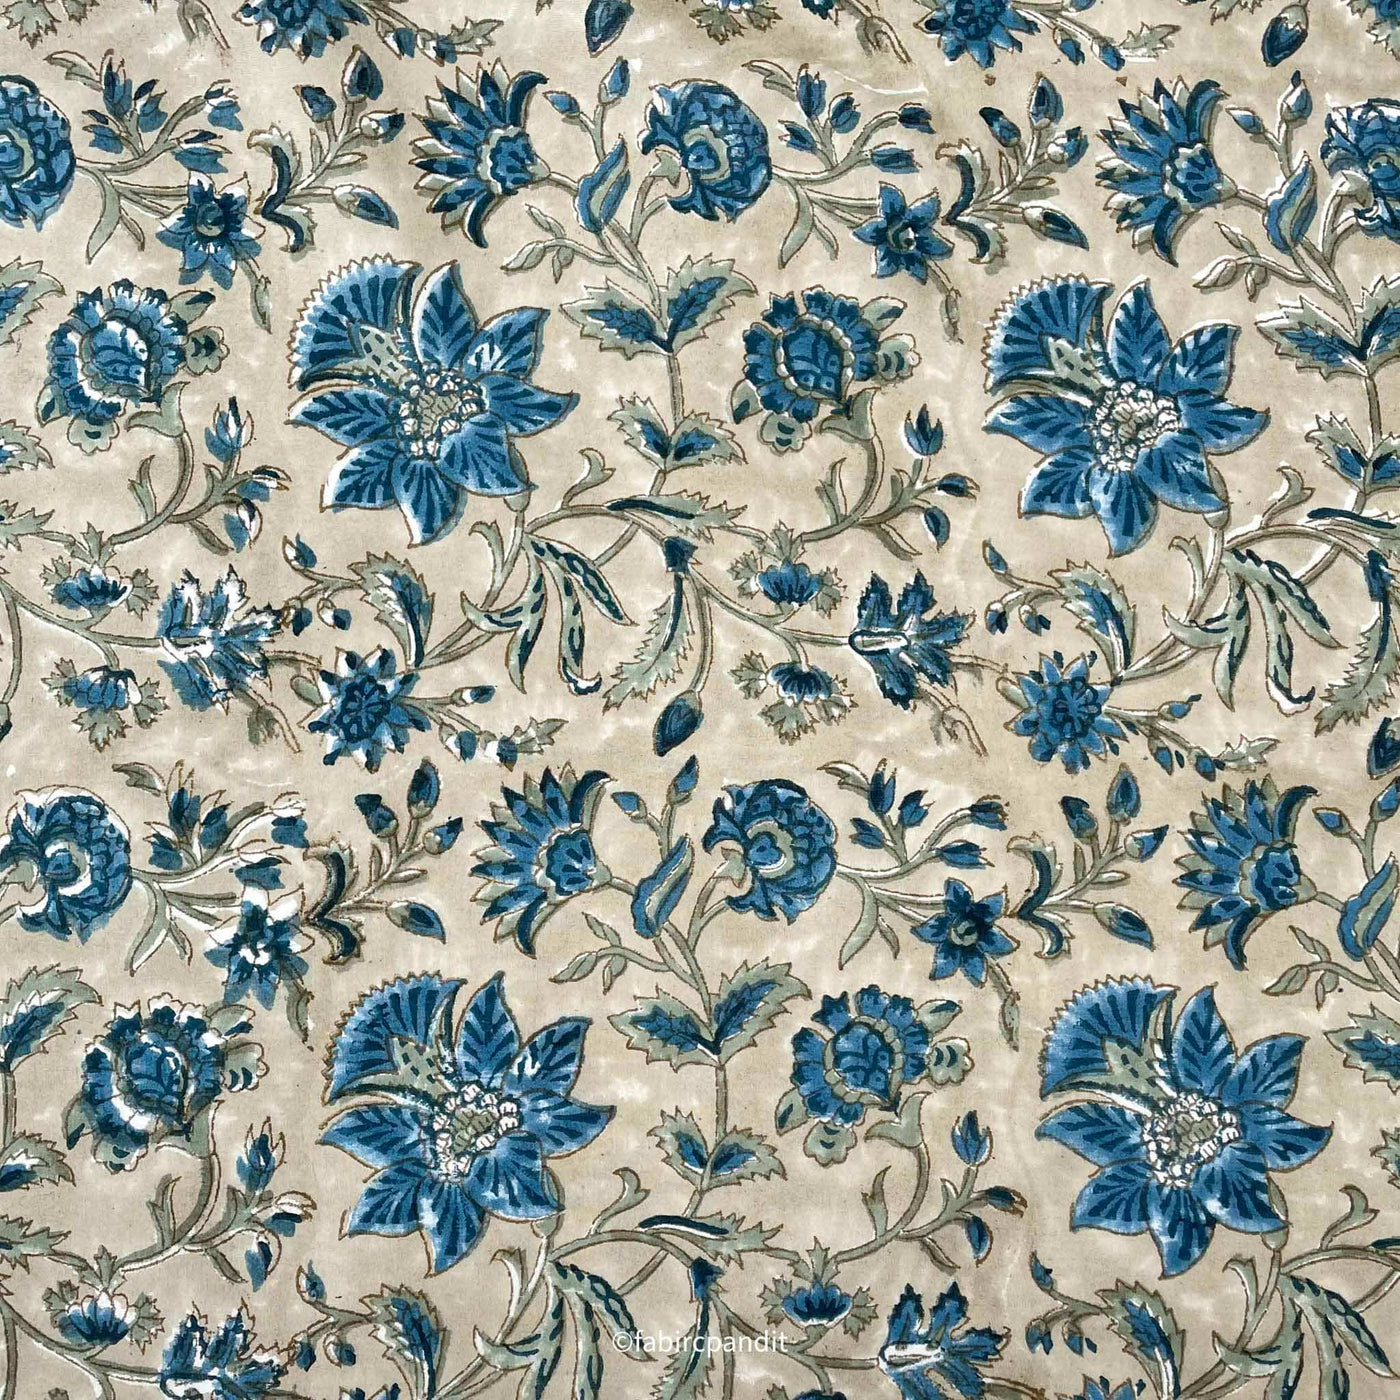 Fabric Pandit Fabric Grey and Water Blue Egyptian Floral Vines Hand Block Printed Pure Cotton Fabirc (Width 43 inches)